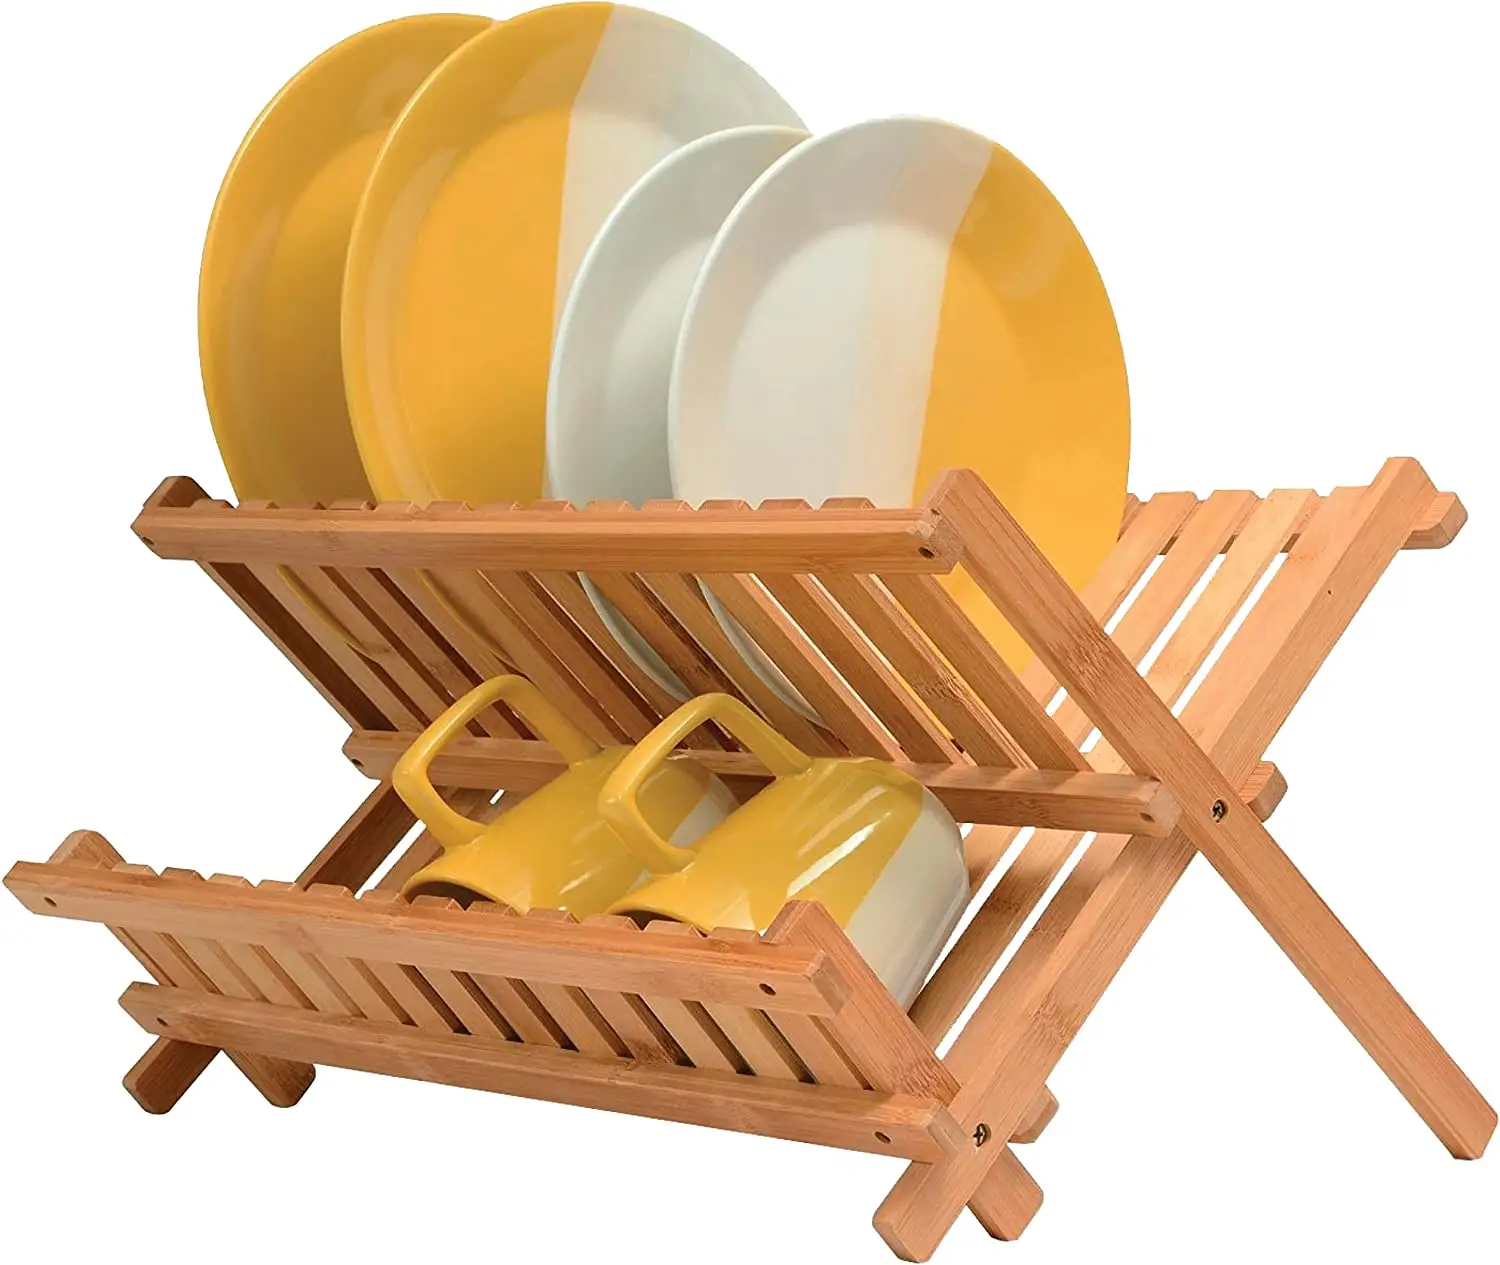 Foldable Dish Drying Rack - Wooden 2 Tier Dish Drainer Kitchen Plate Rack for Kitchen Countertops - Foldable